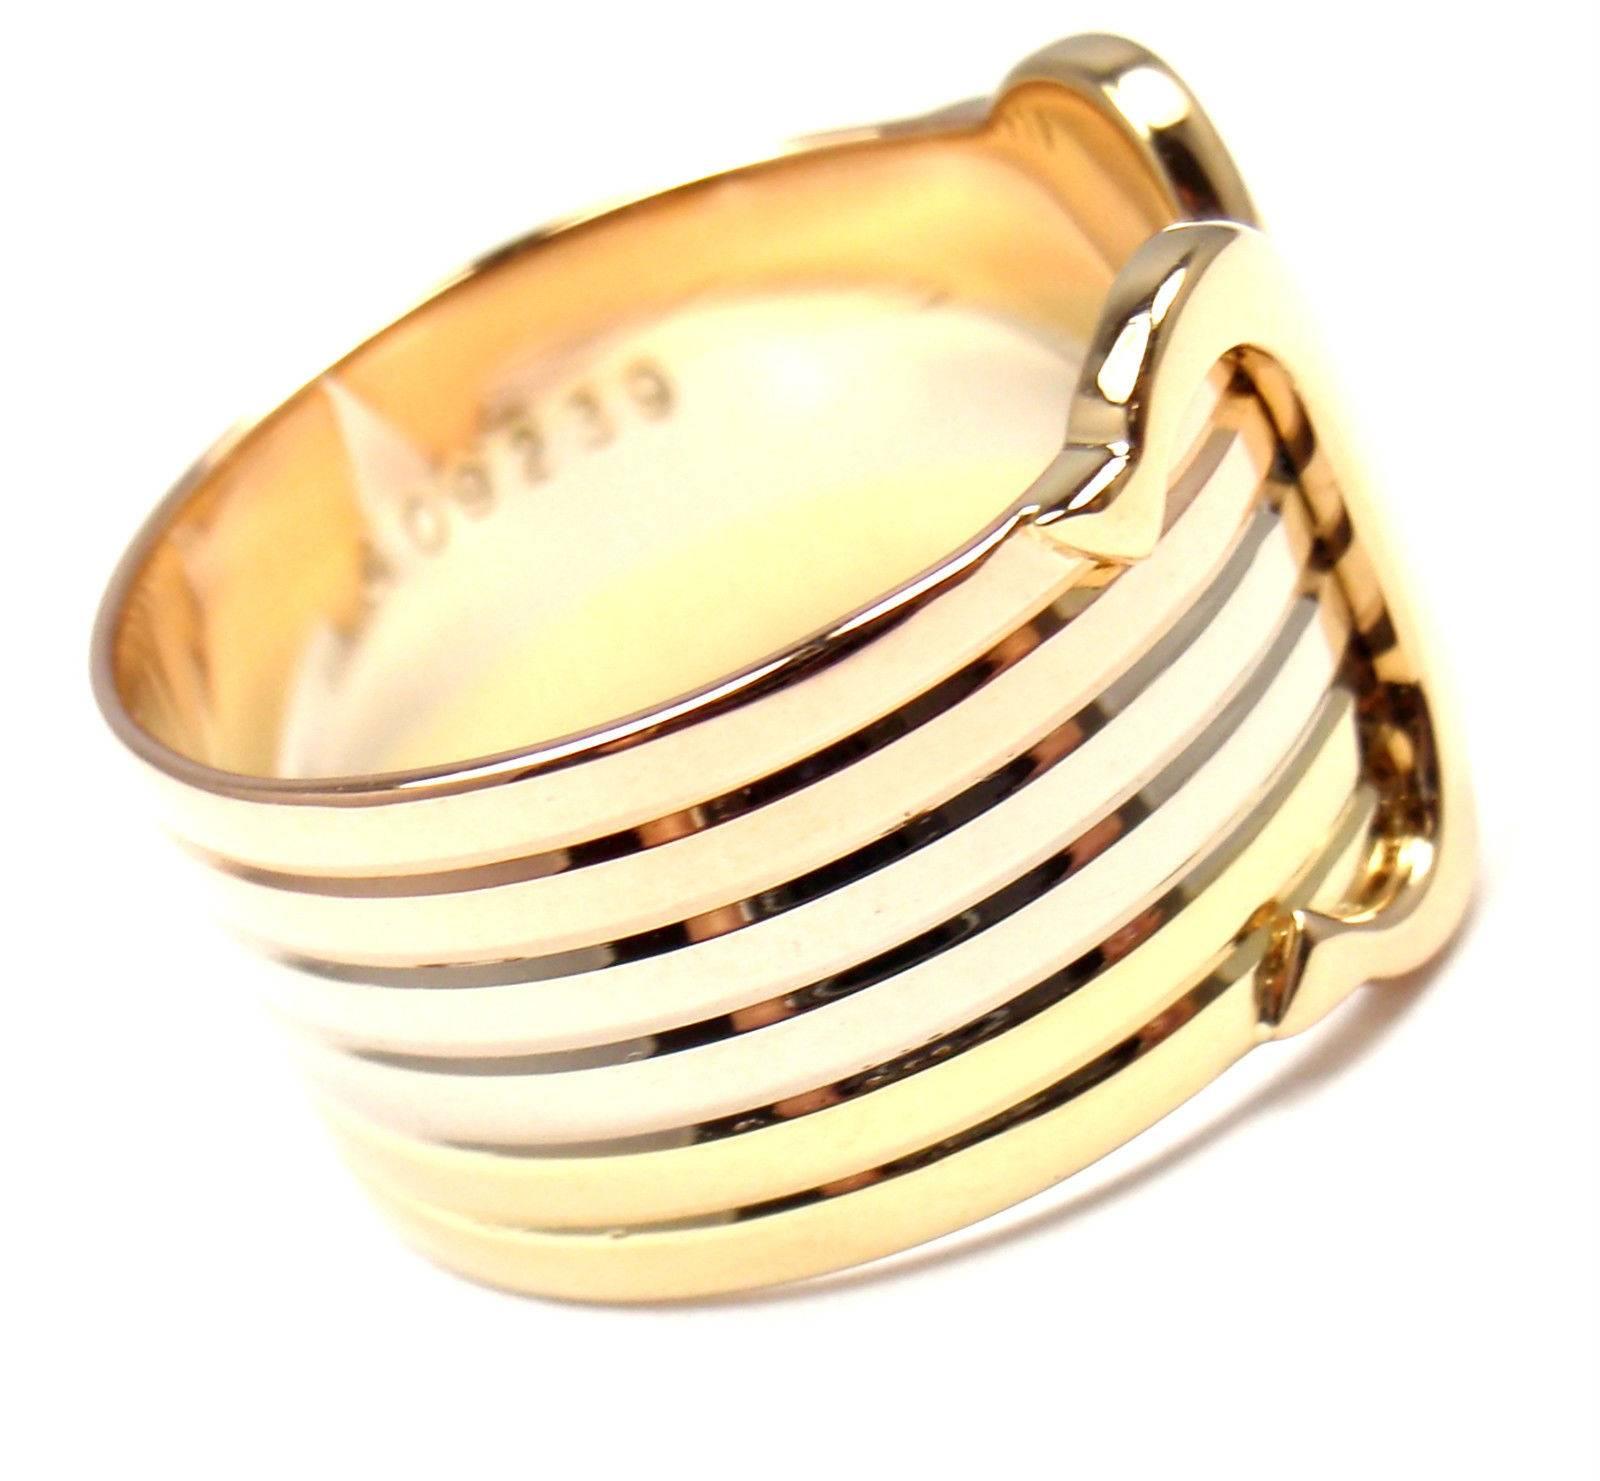 18k Tri-Color Gold Double C Motif Logo Band Ring by Cartier.
This ring comes with Cartier box.
Details:
Size:  European 55 US 7 1/4
Weight: 6.2 grams
Width: 13mm
Stamped Hallmarks: Cartier 750 55 409239

*Free Shipping within the United